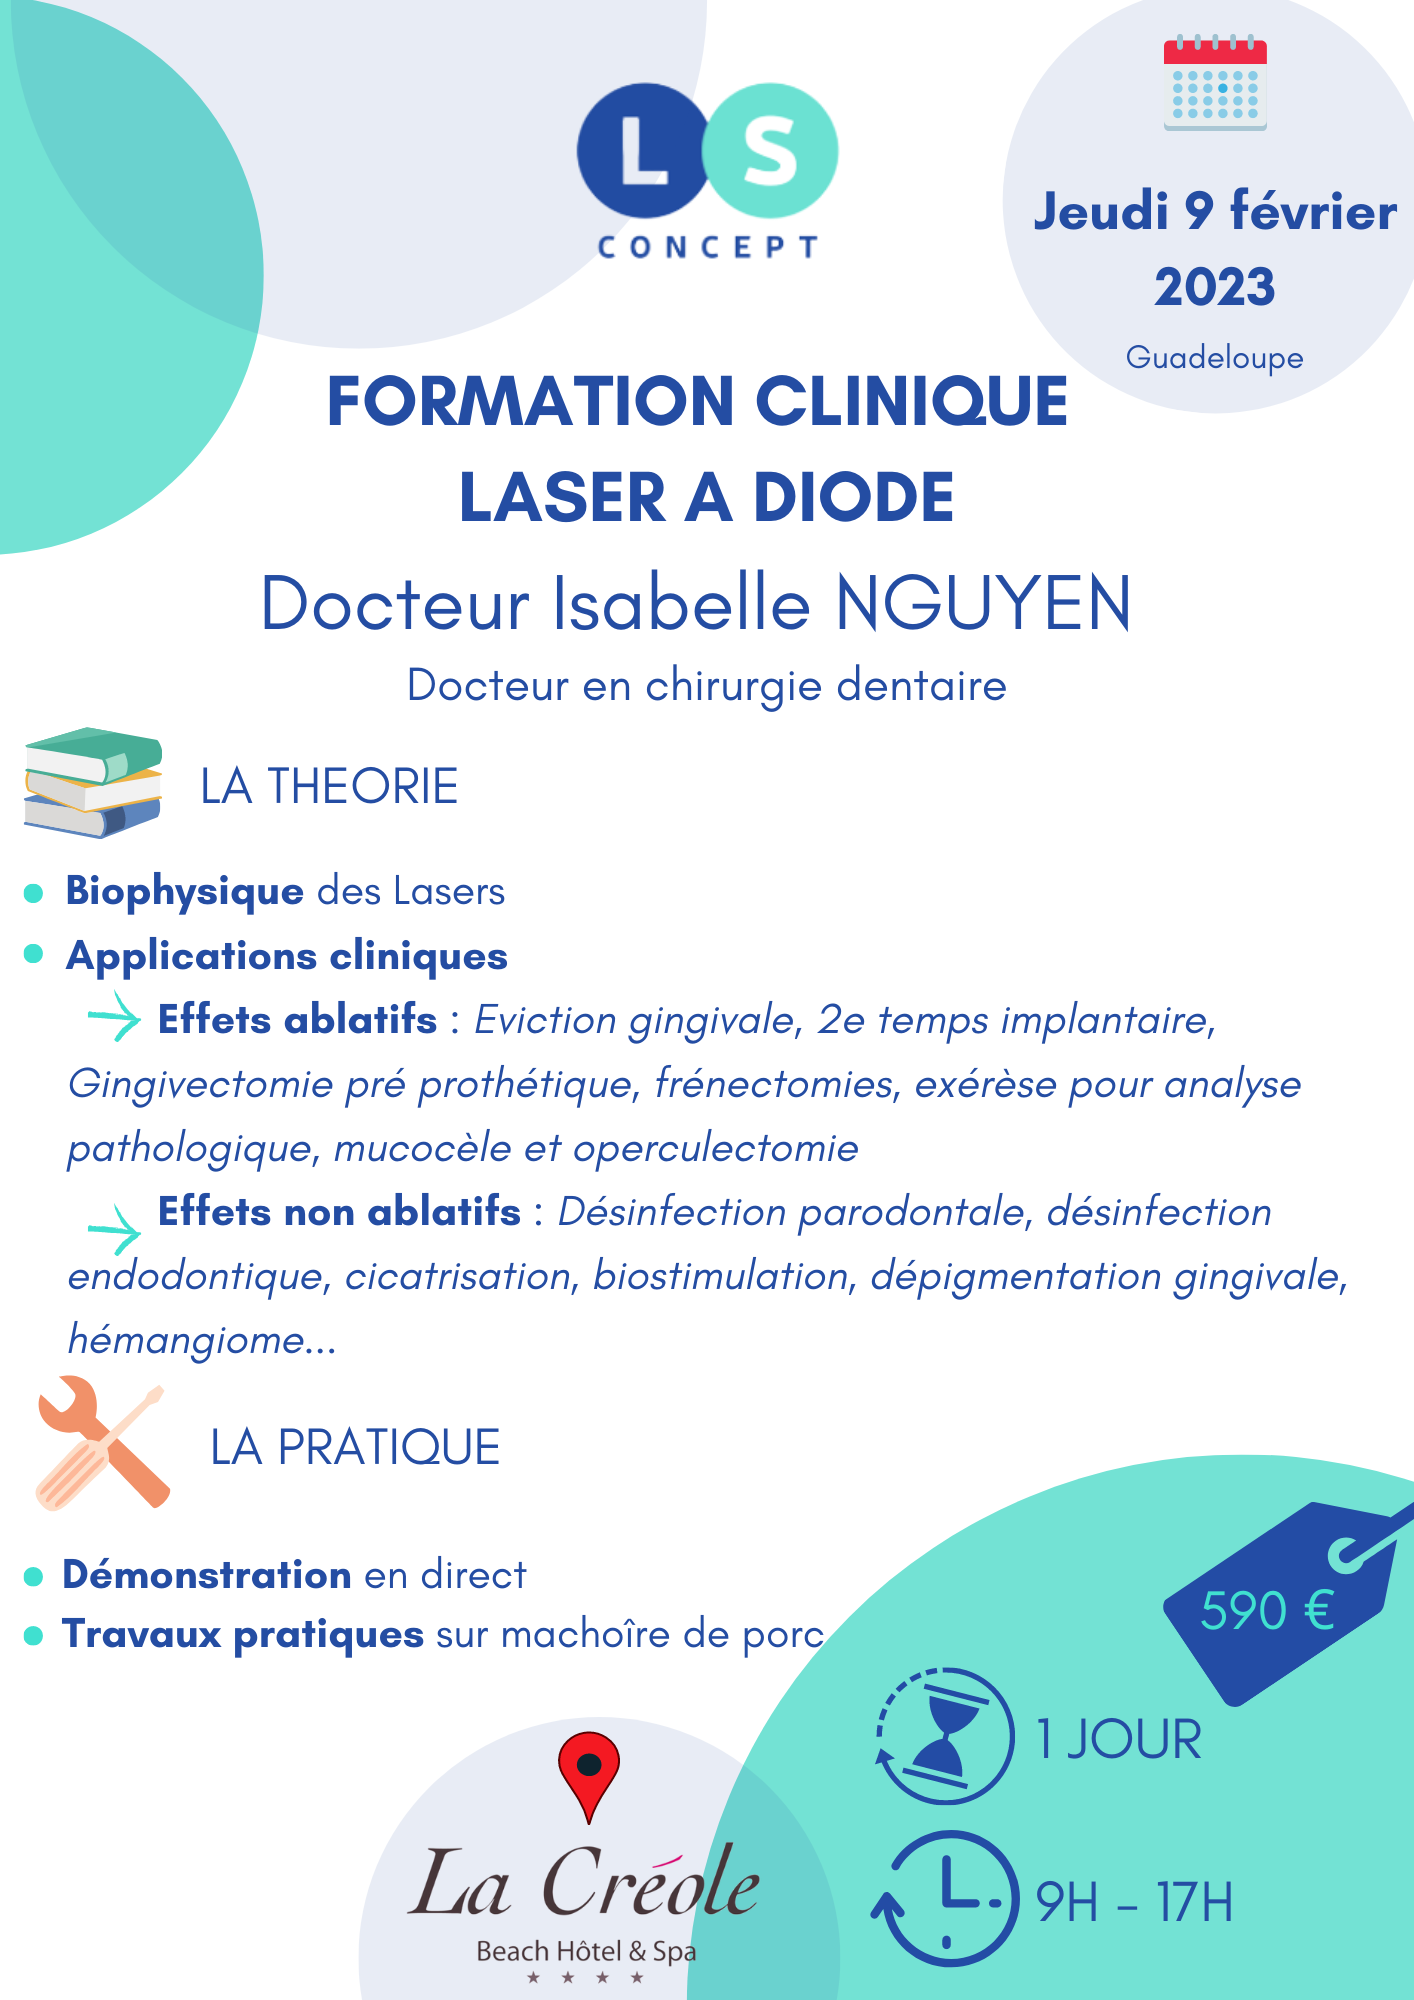 Formation clinique laser a diode